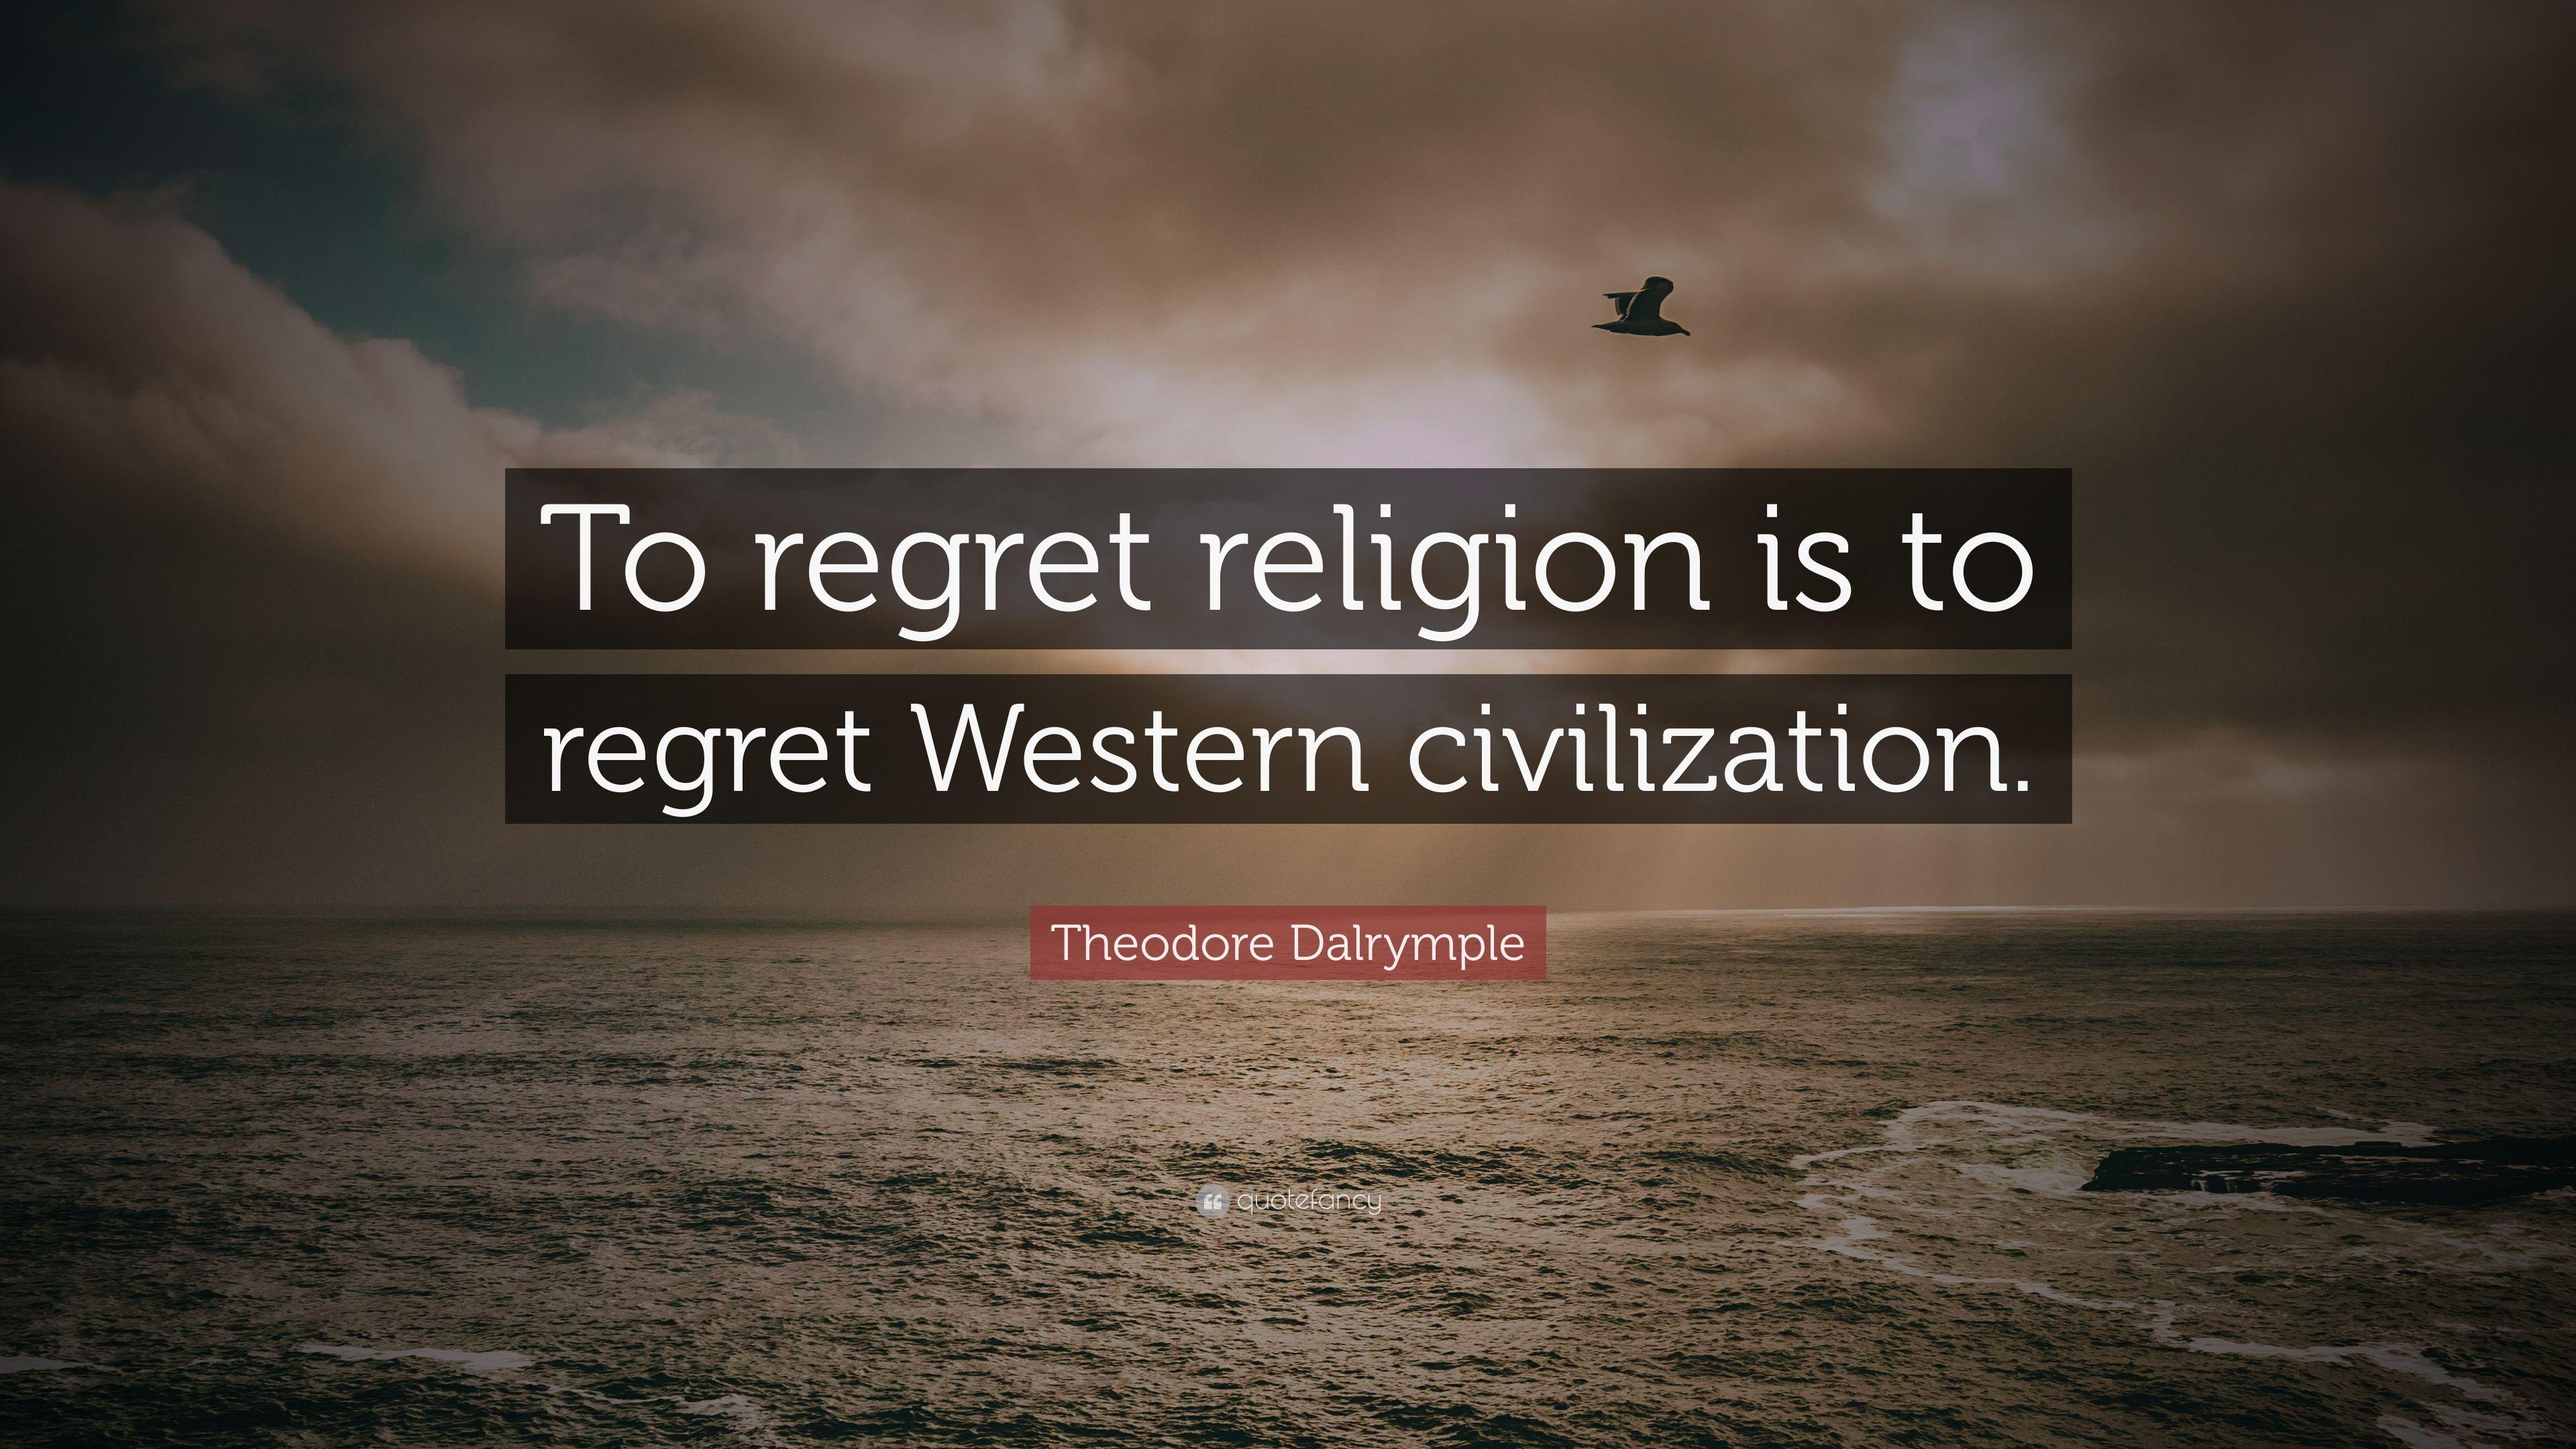 Theodore Dalrymple Quote: “To regret religion is to regret Western